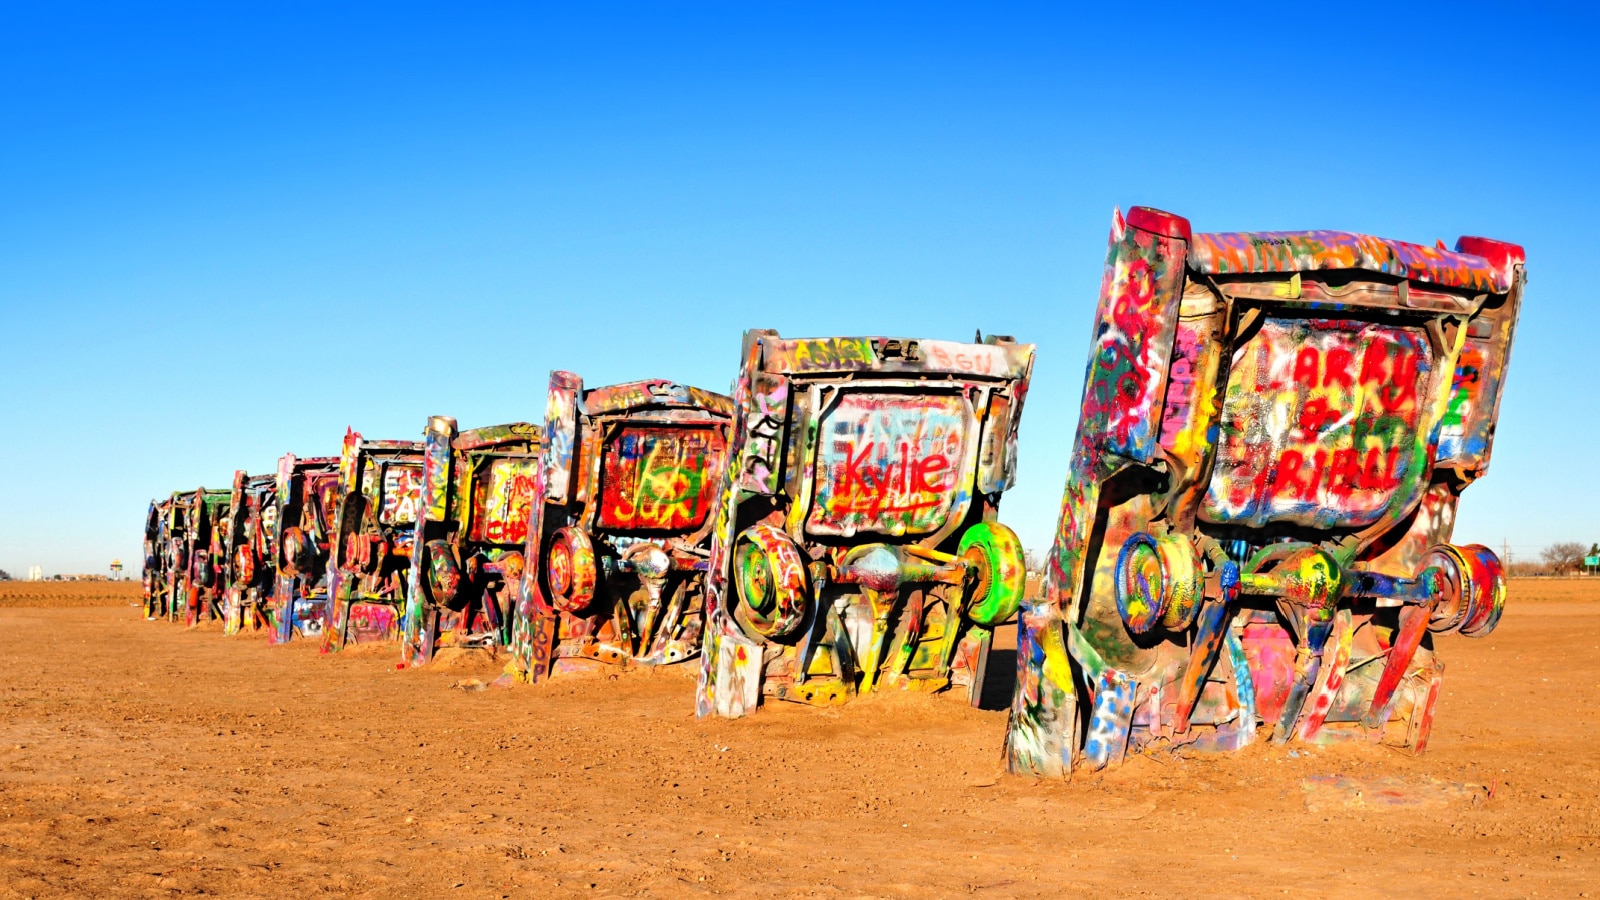 AMARILLO, TEXAS, USA - DEC. 2013: Cadillac Ranch is a public art installation and sculpture in Texas, U.S. created in 1974 by Chip Lord, Hudson Marquez and Doug Michels, of the art group Ant Farm.